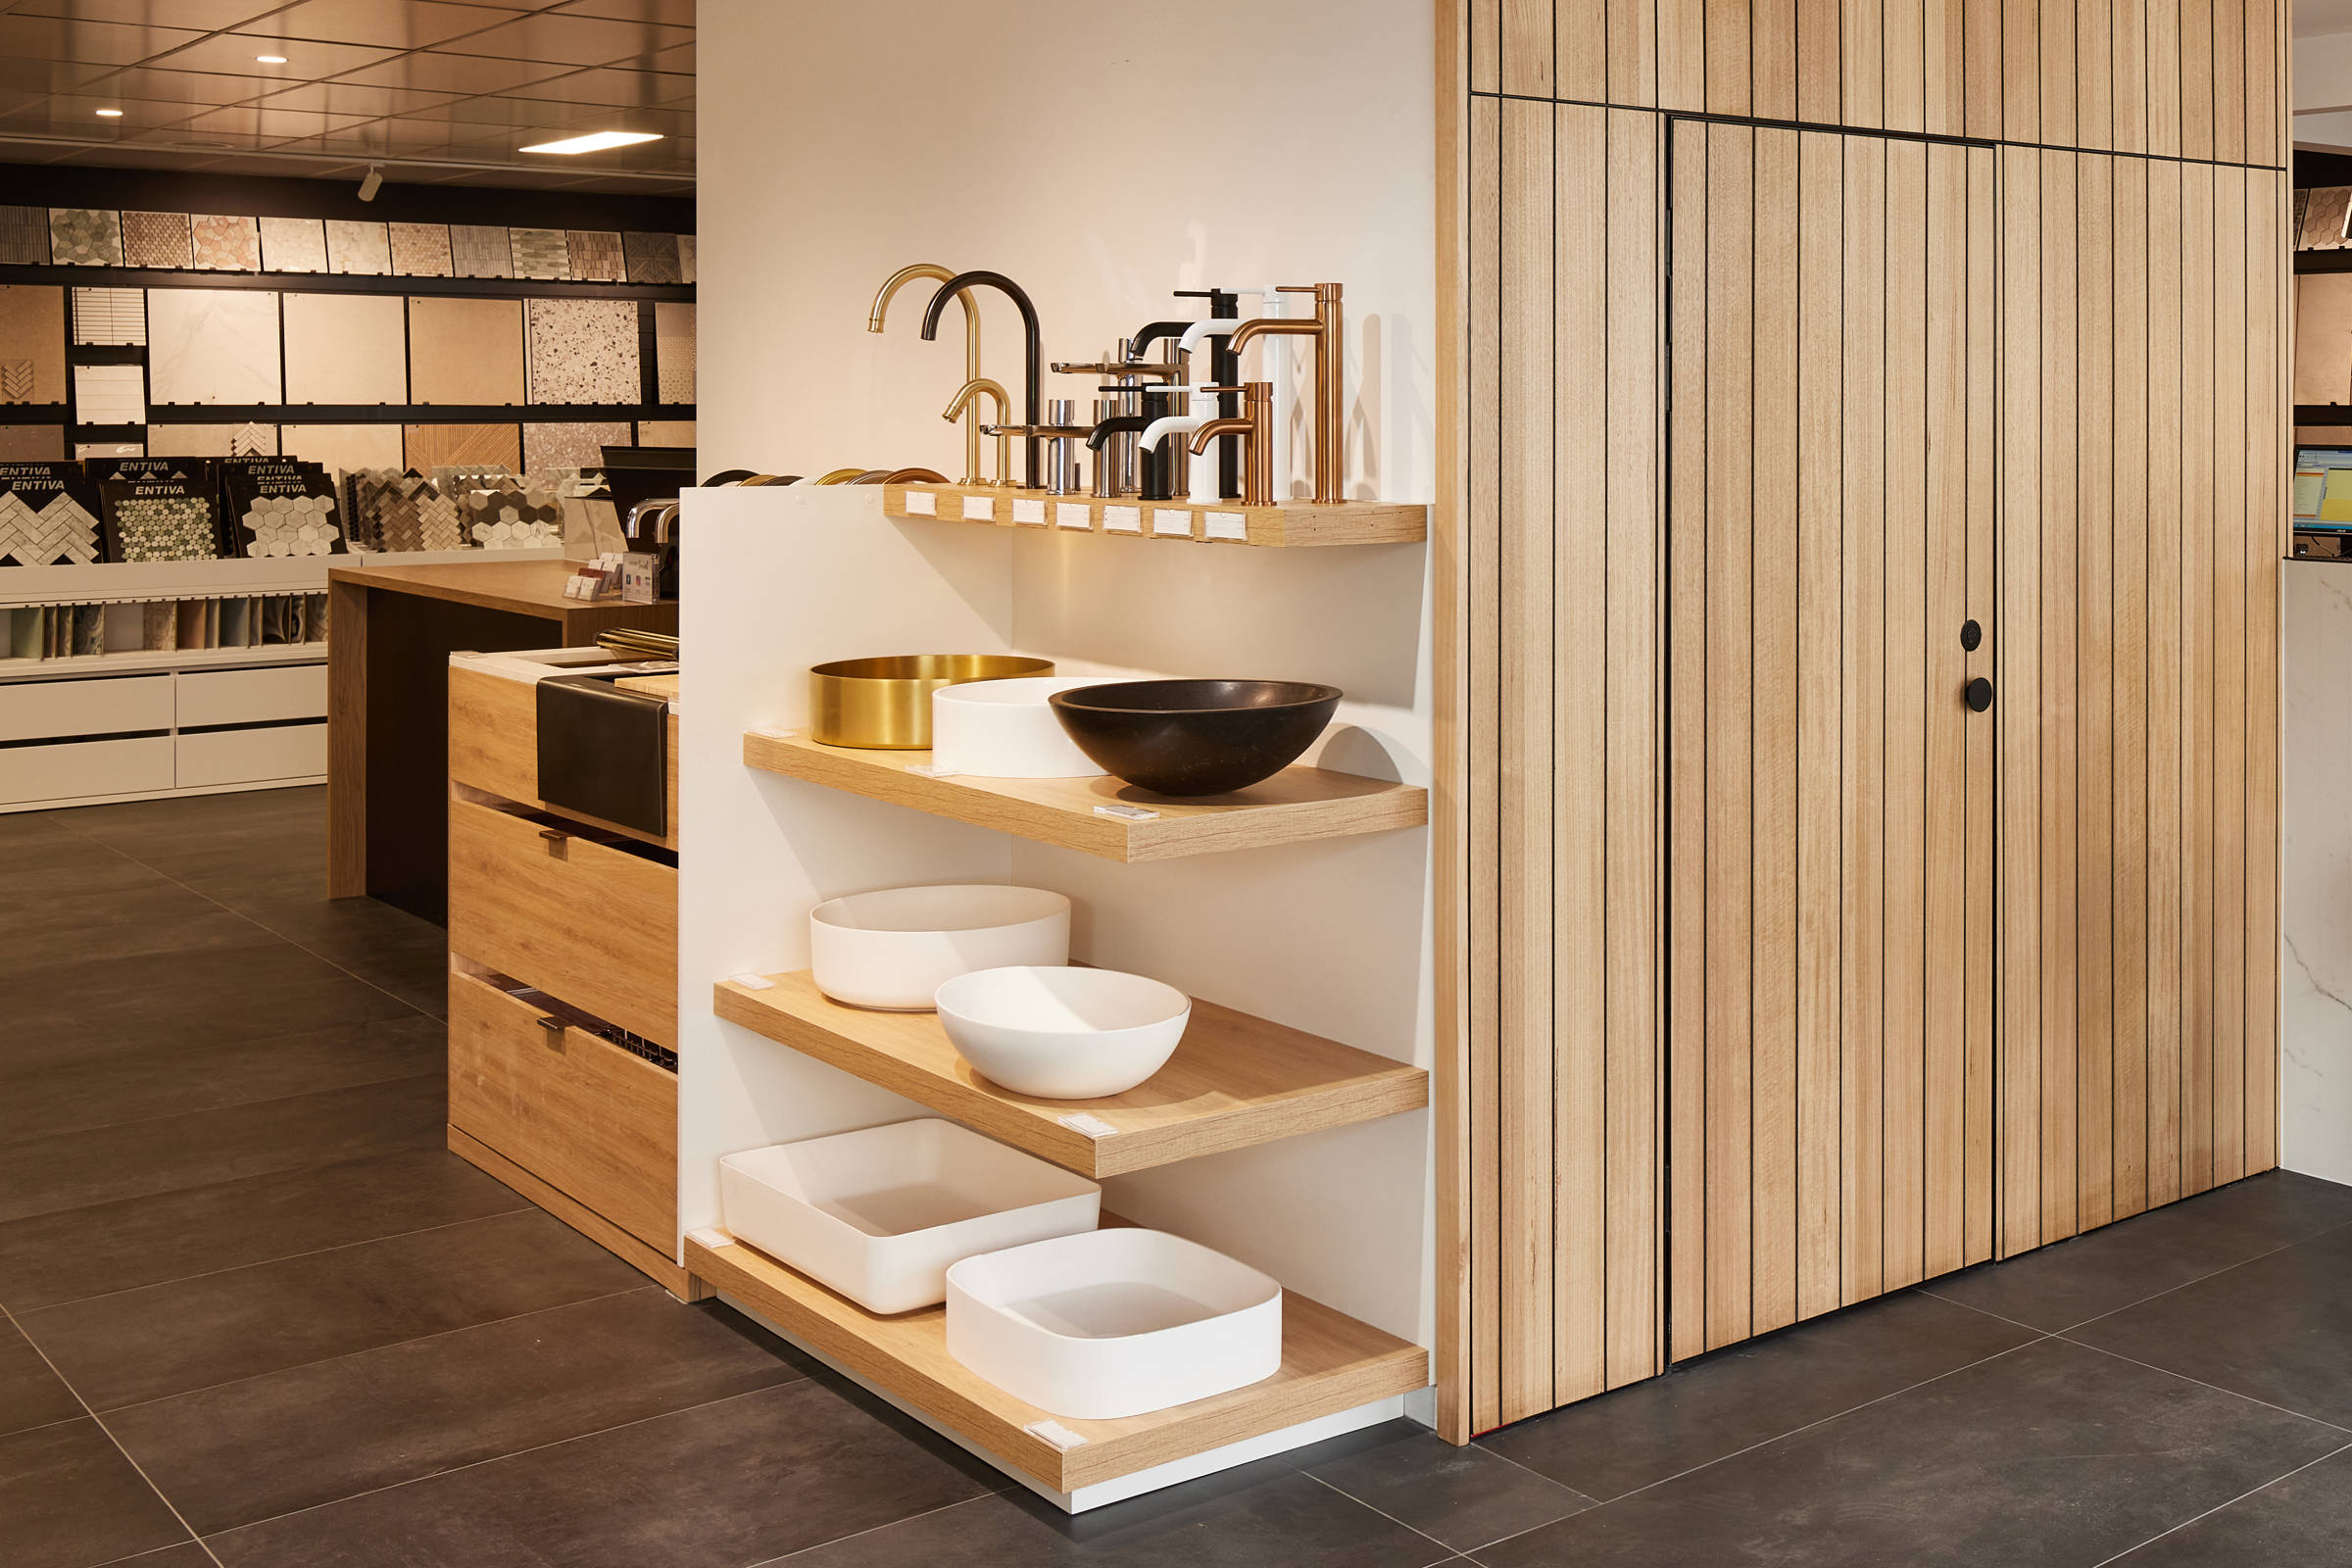 An aspect of the Rossetto Tiles showroom, featuring four timber shelves displaying taps and bathroom basins. The image details neat Tasmanian oak timber panelling for an internal room and the area is bright and well lit. Credit: Samuel Shelley.